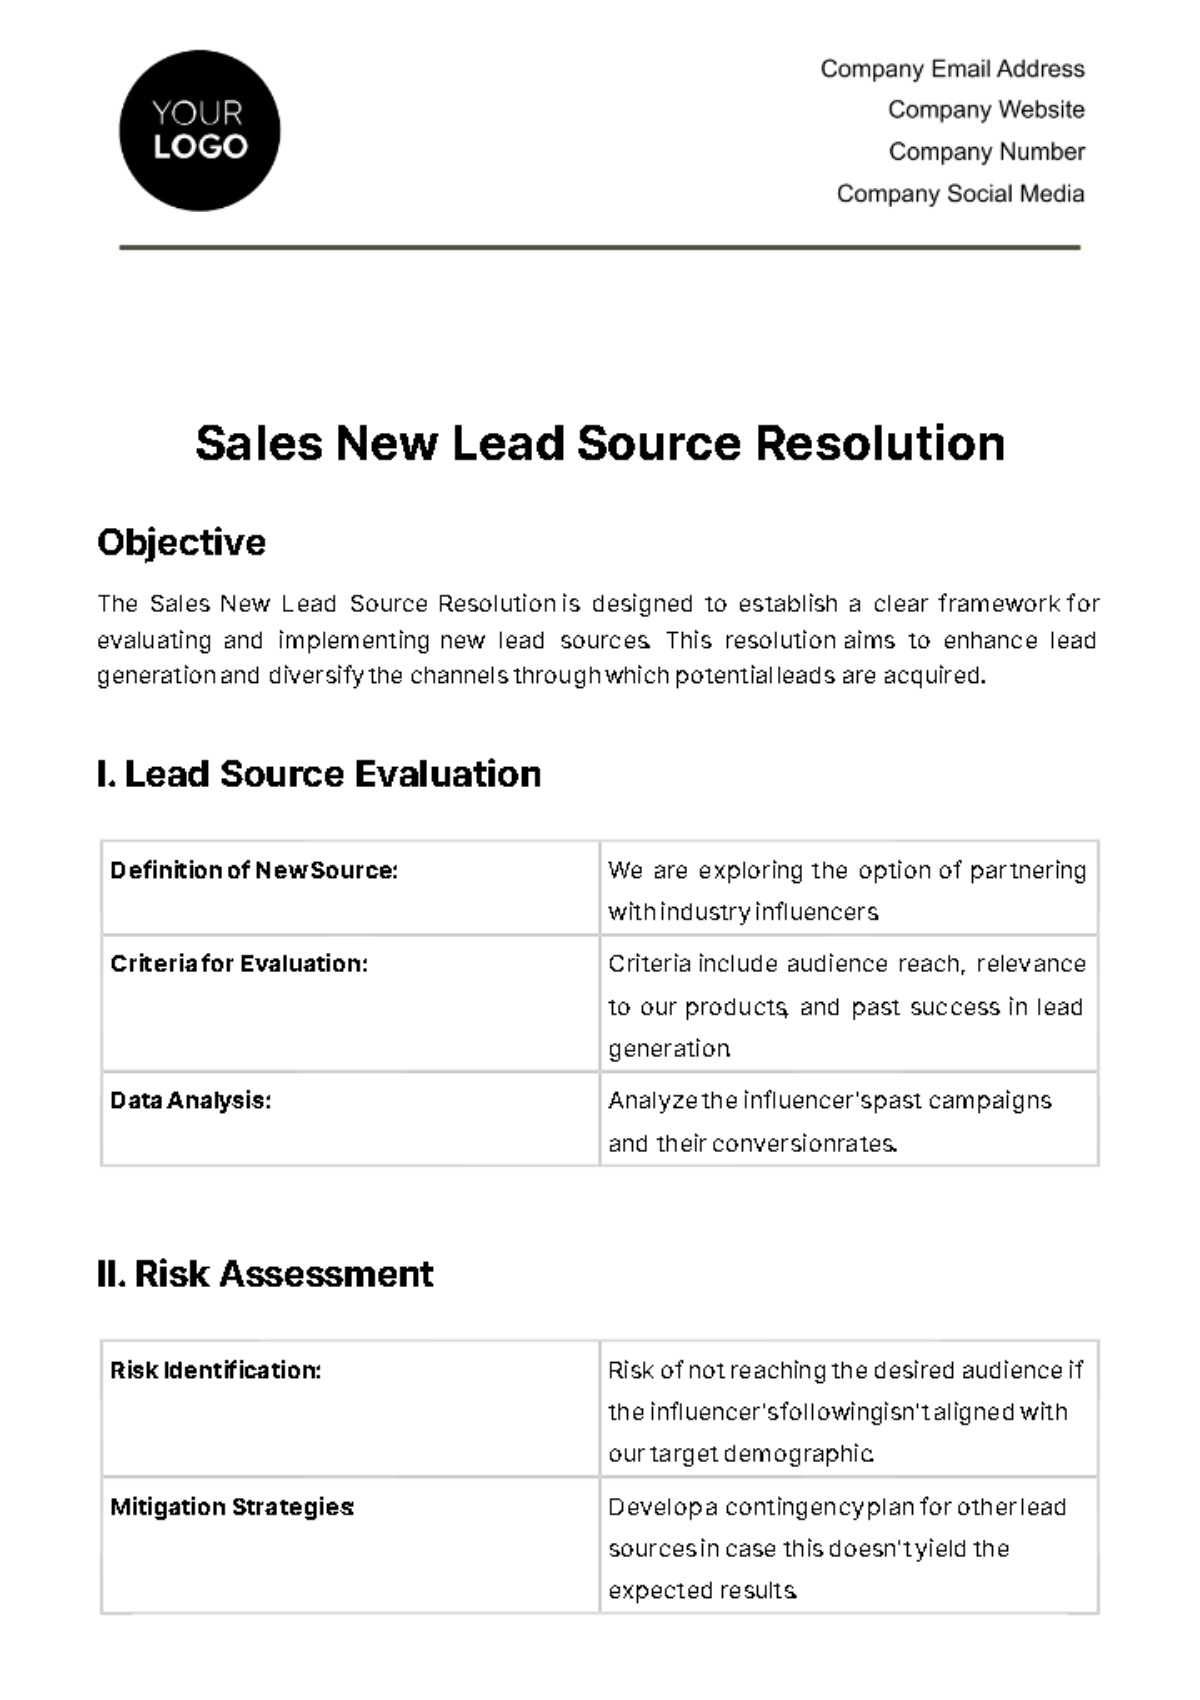 Sales New Lead Source Resolution Template